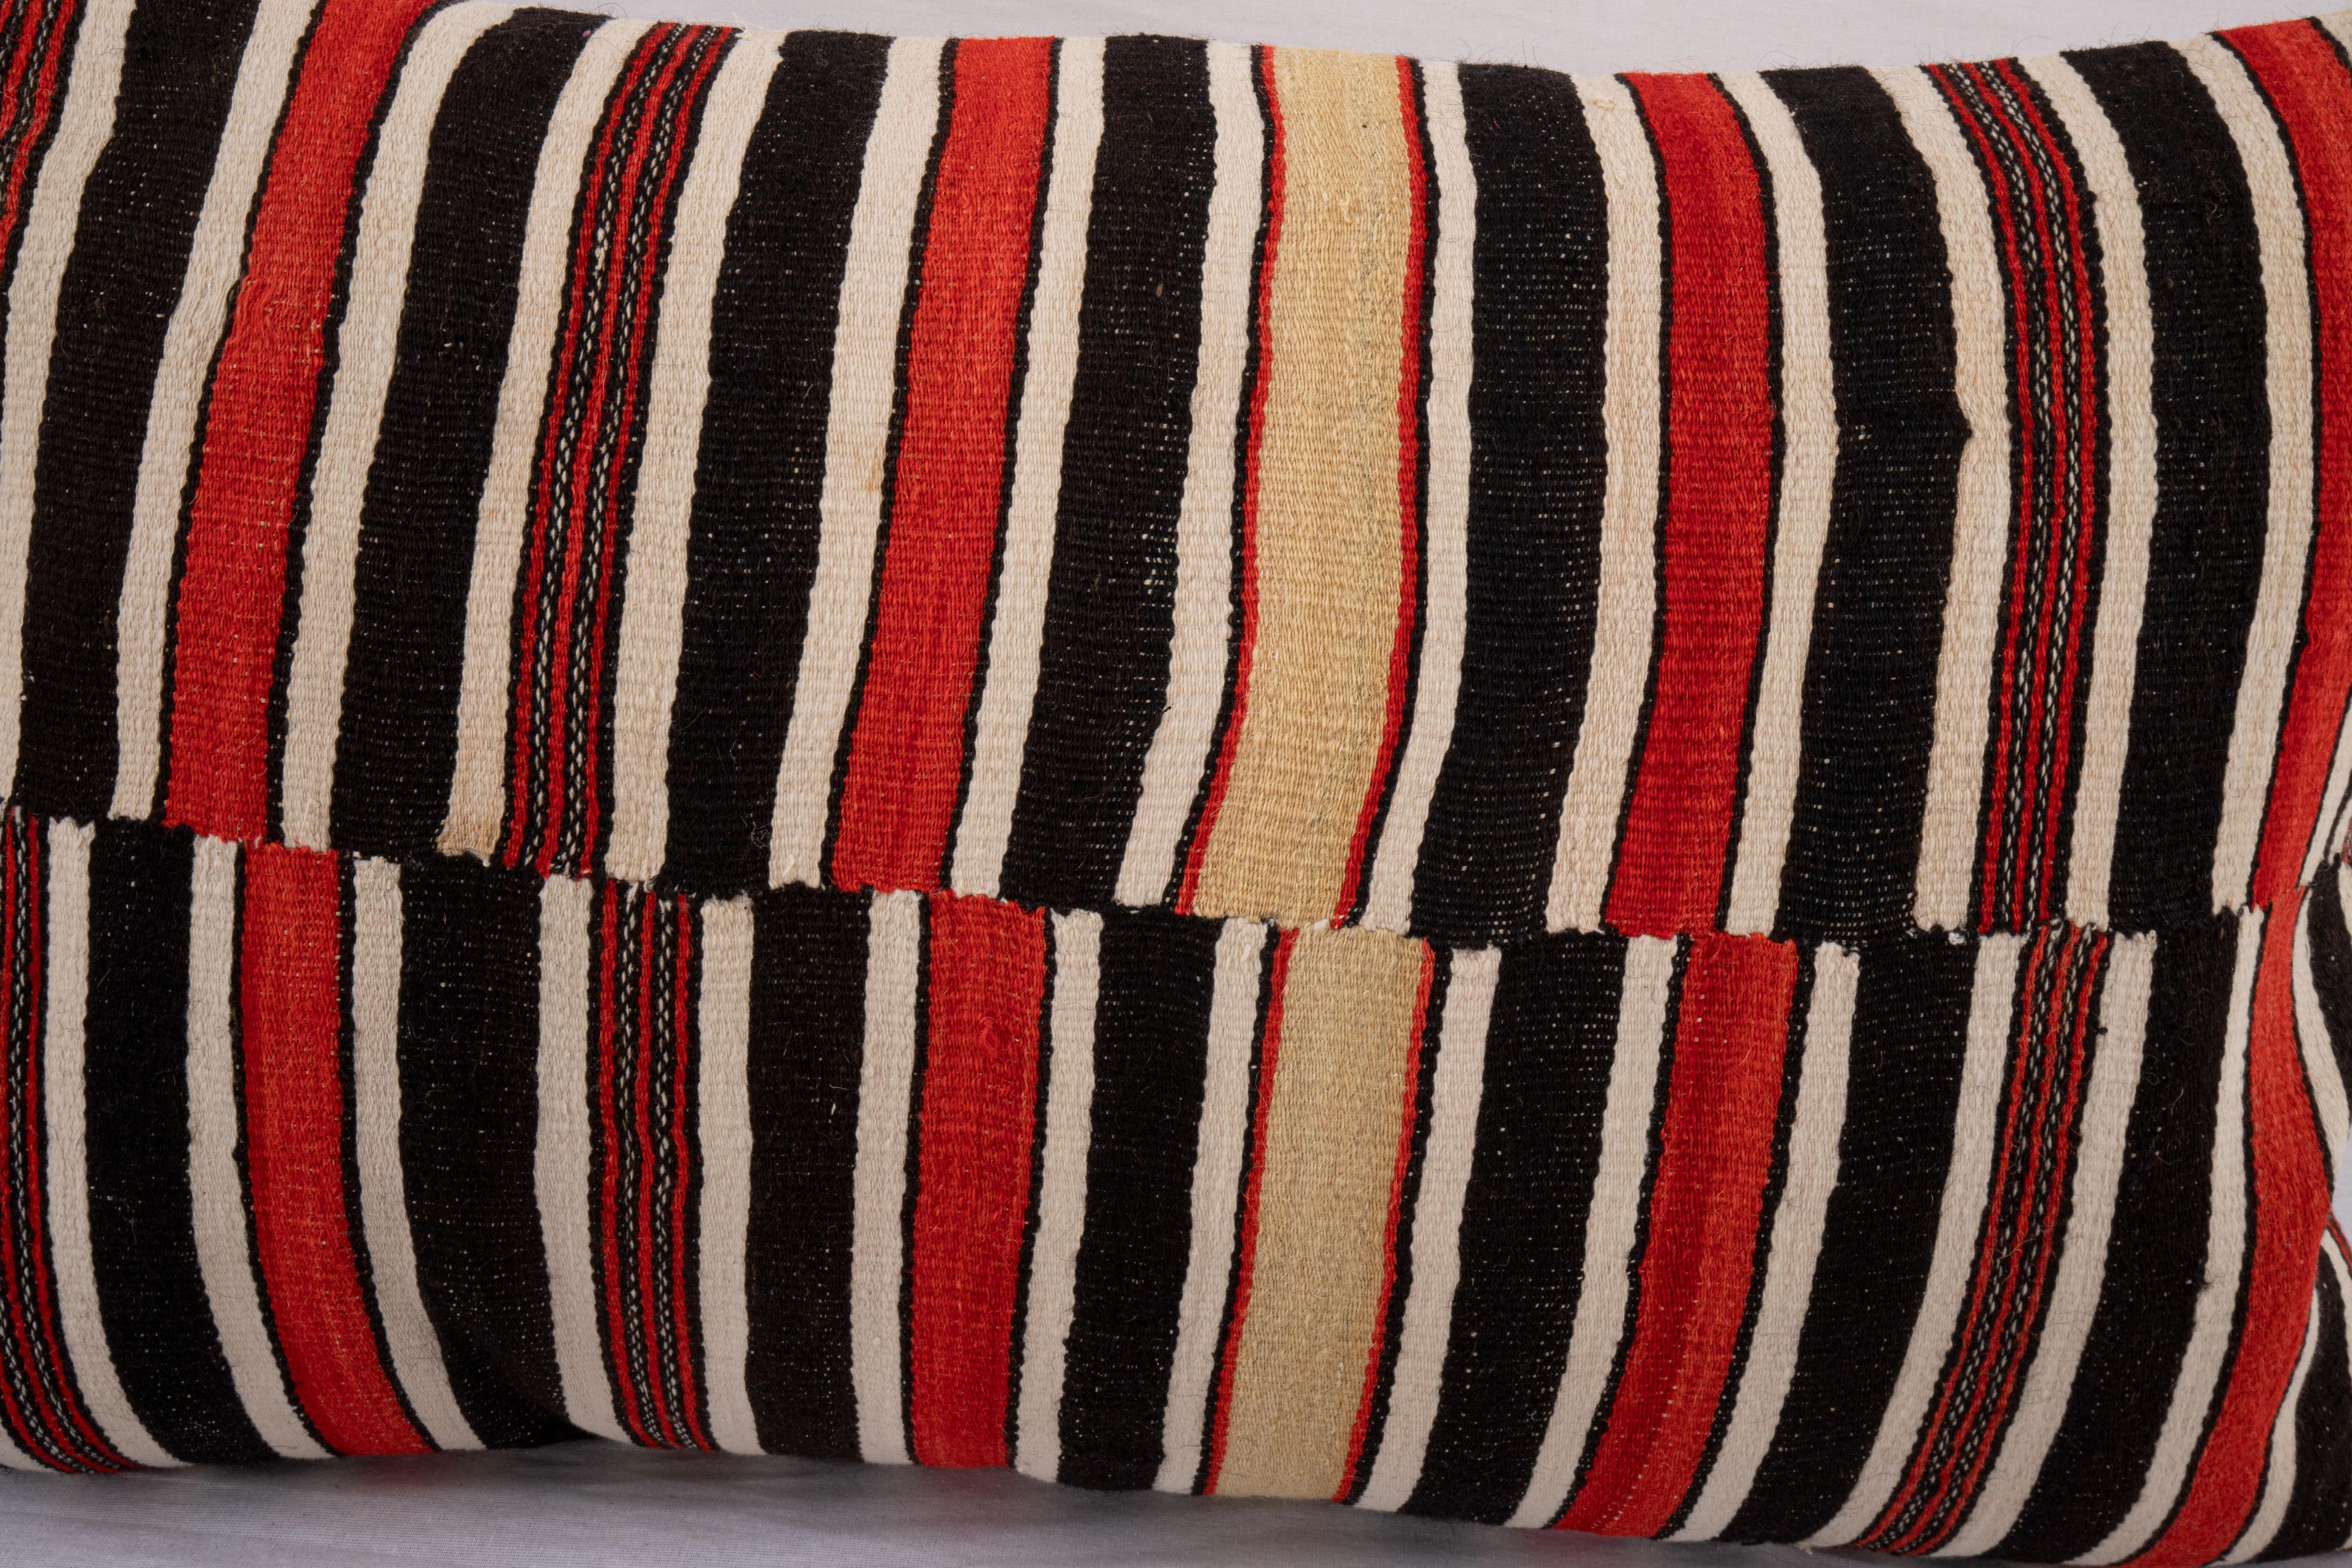 Hand-Woven Pillow Cover Made from a Vintage West African Fulani Blanket For Sale